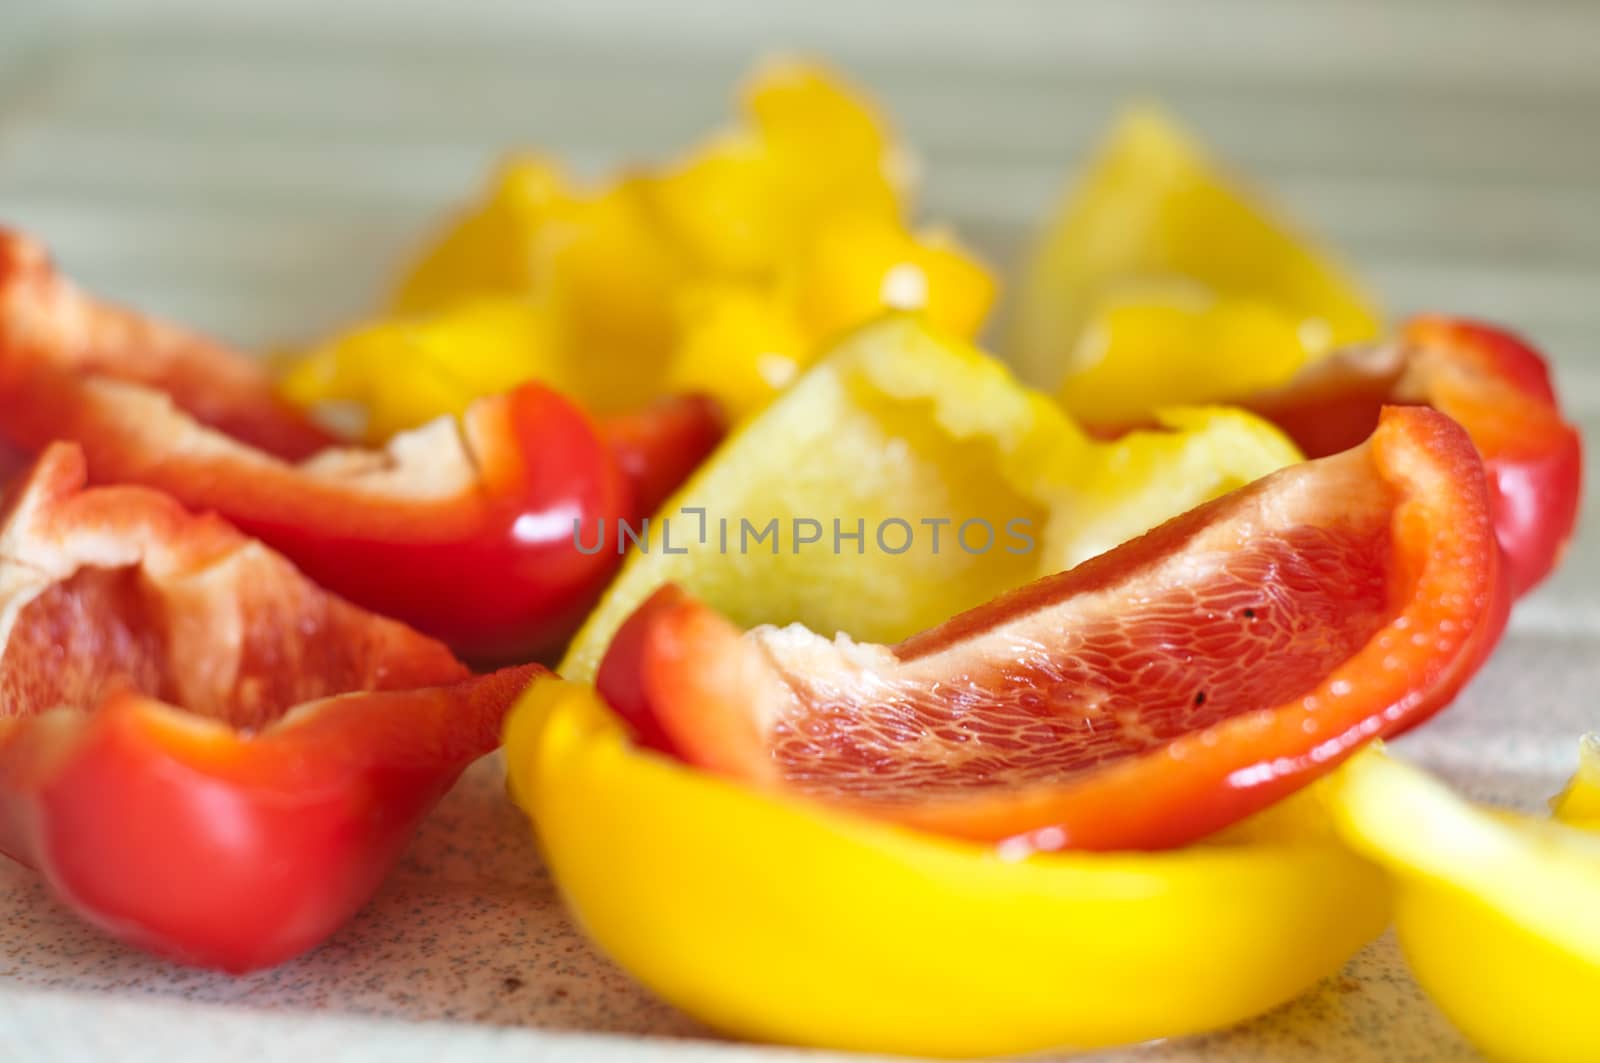 red and yellow peppers by NeydtStock